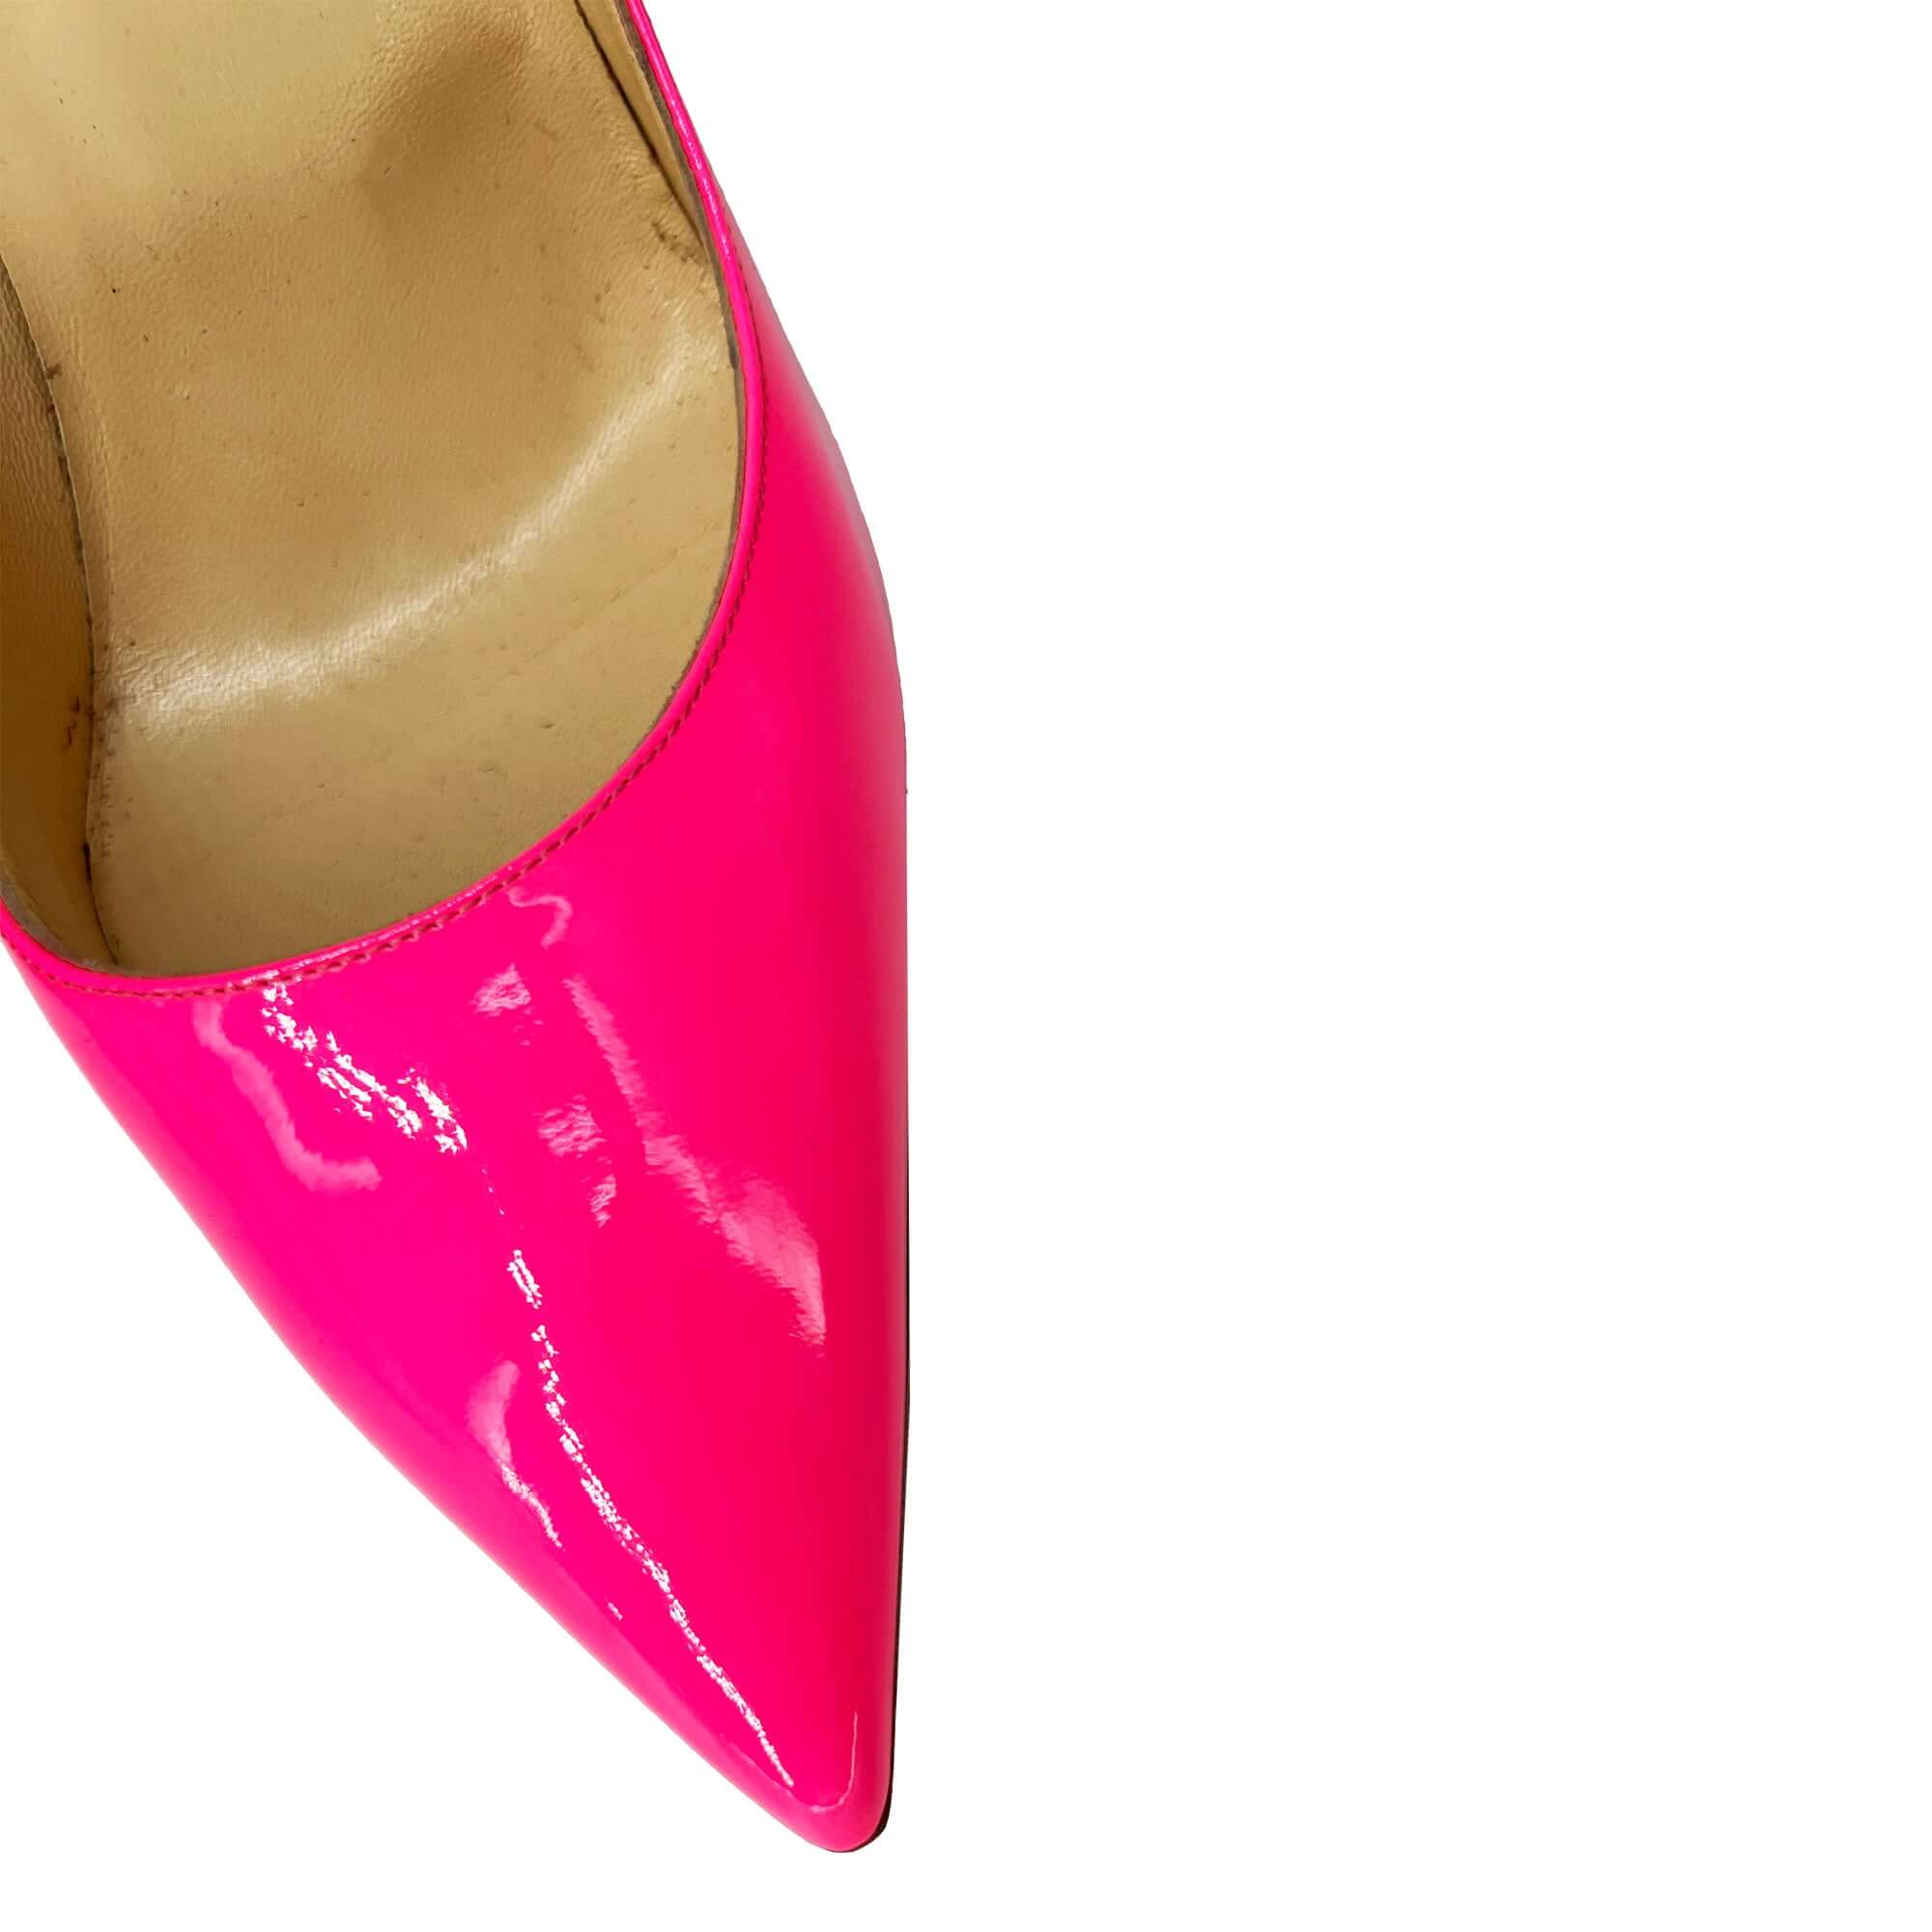 Christian Louboutin pink So Kate leather heels